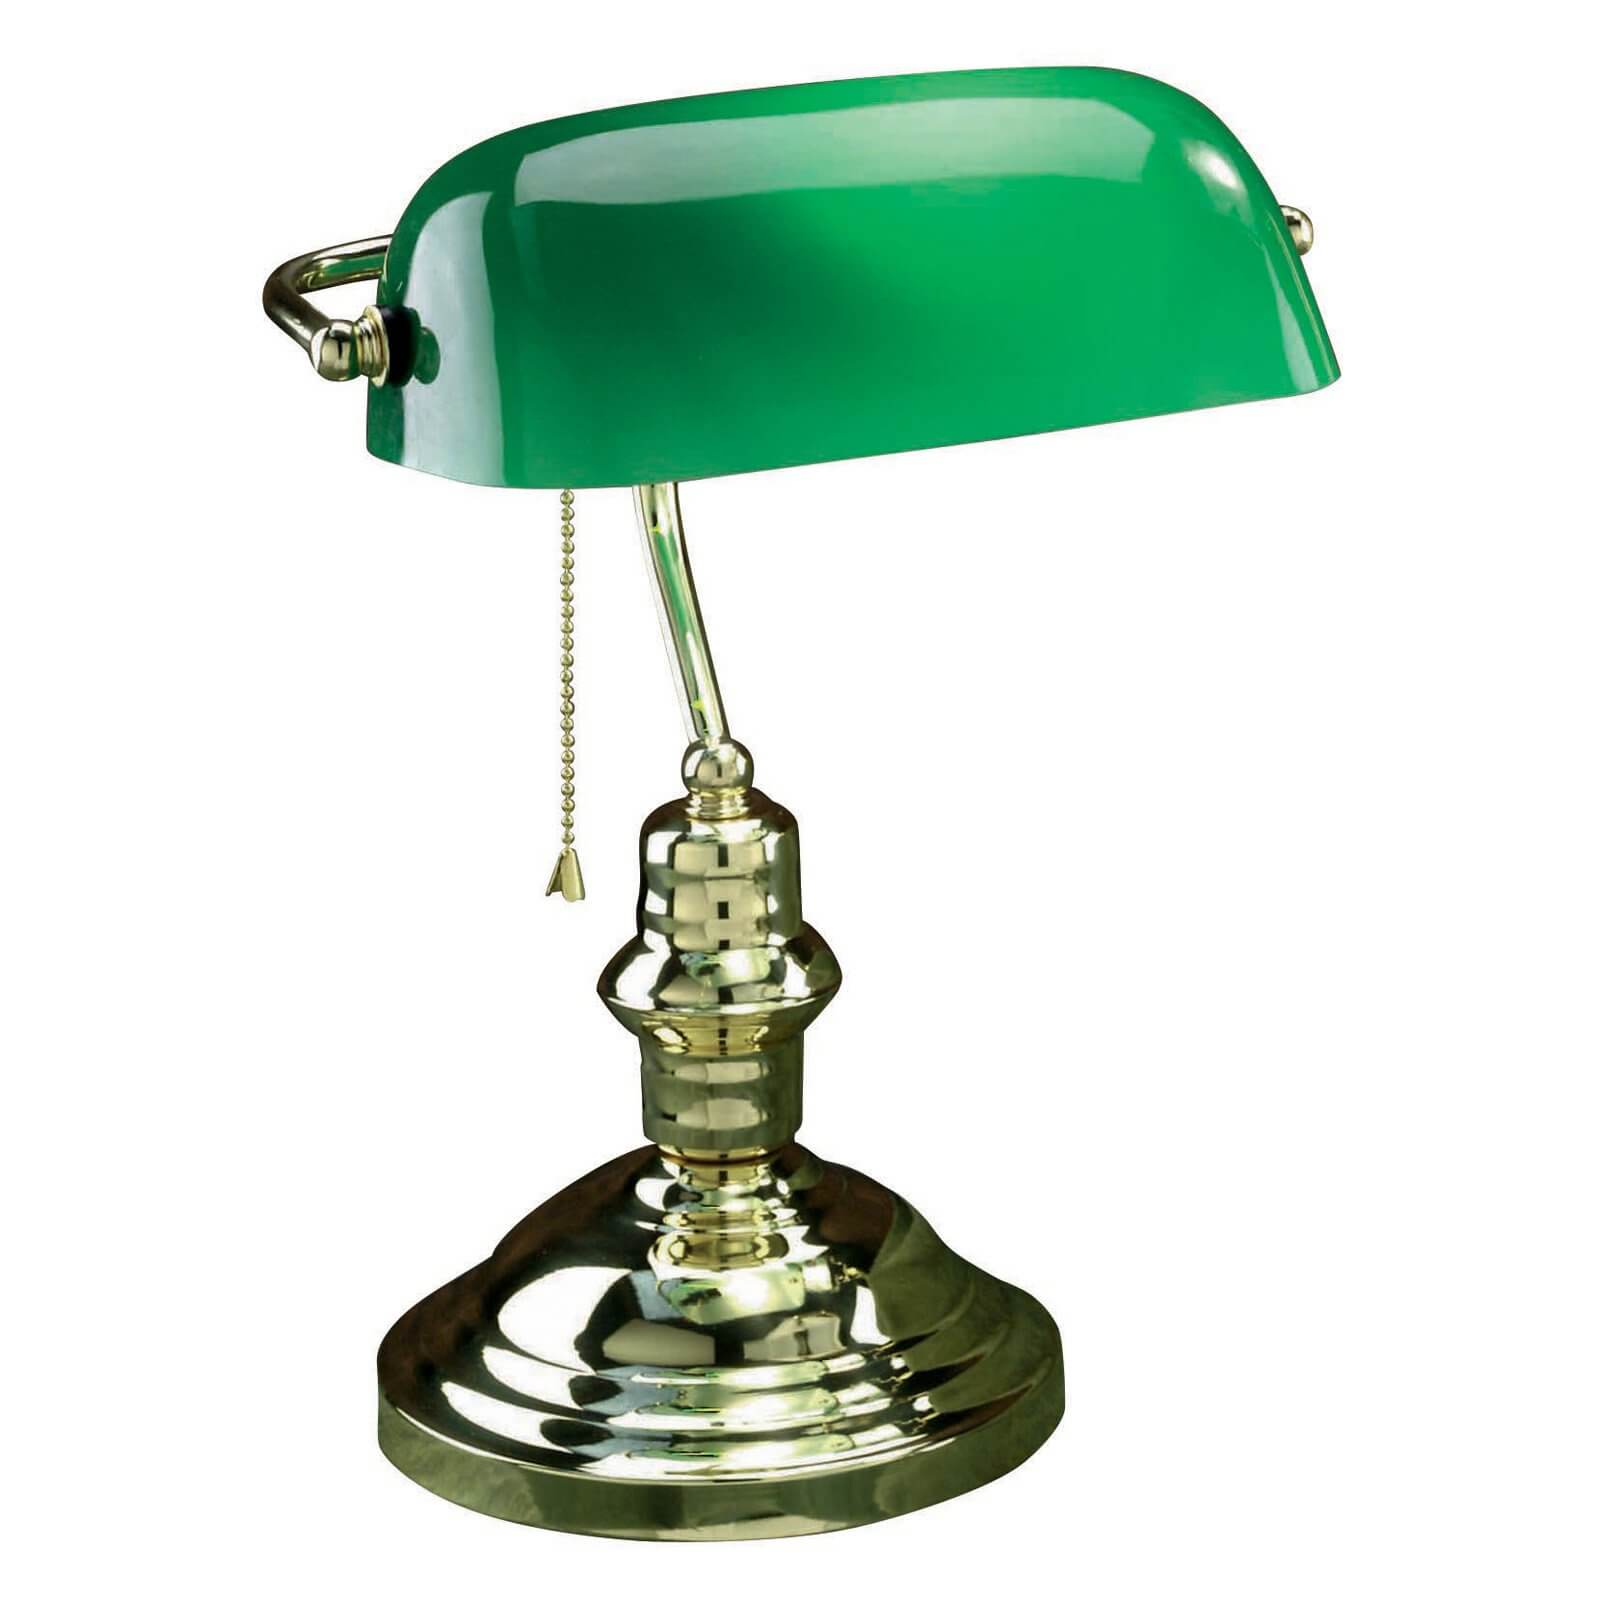 Our first model is the classic green glass shade design, which you may recognize from countless films and possibly your own parents or grandparents